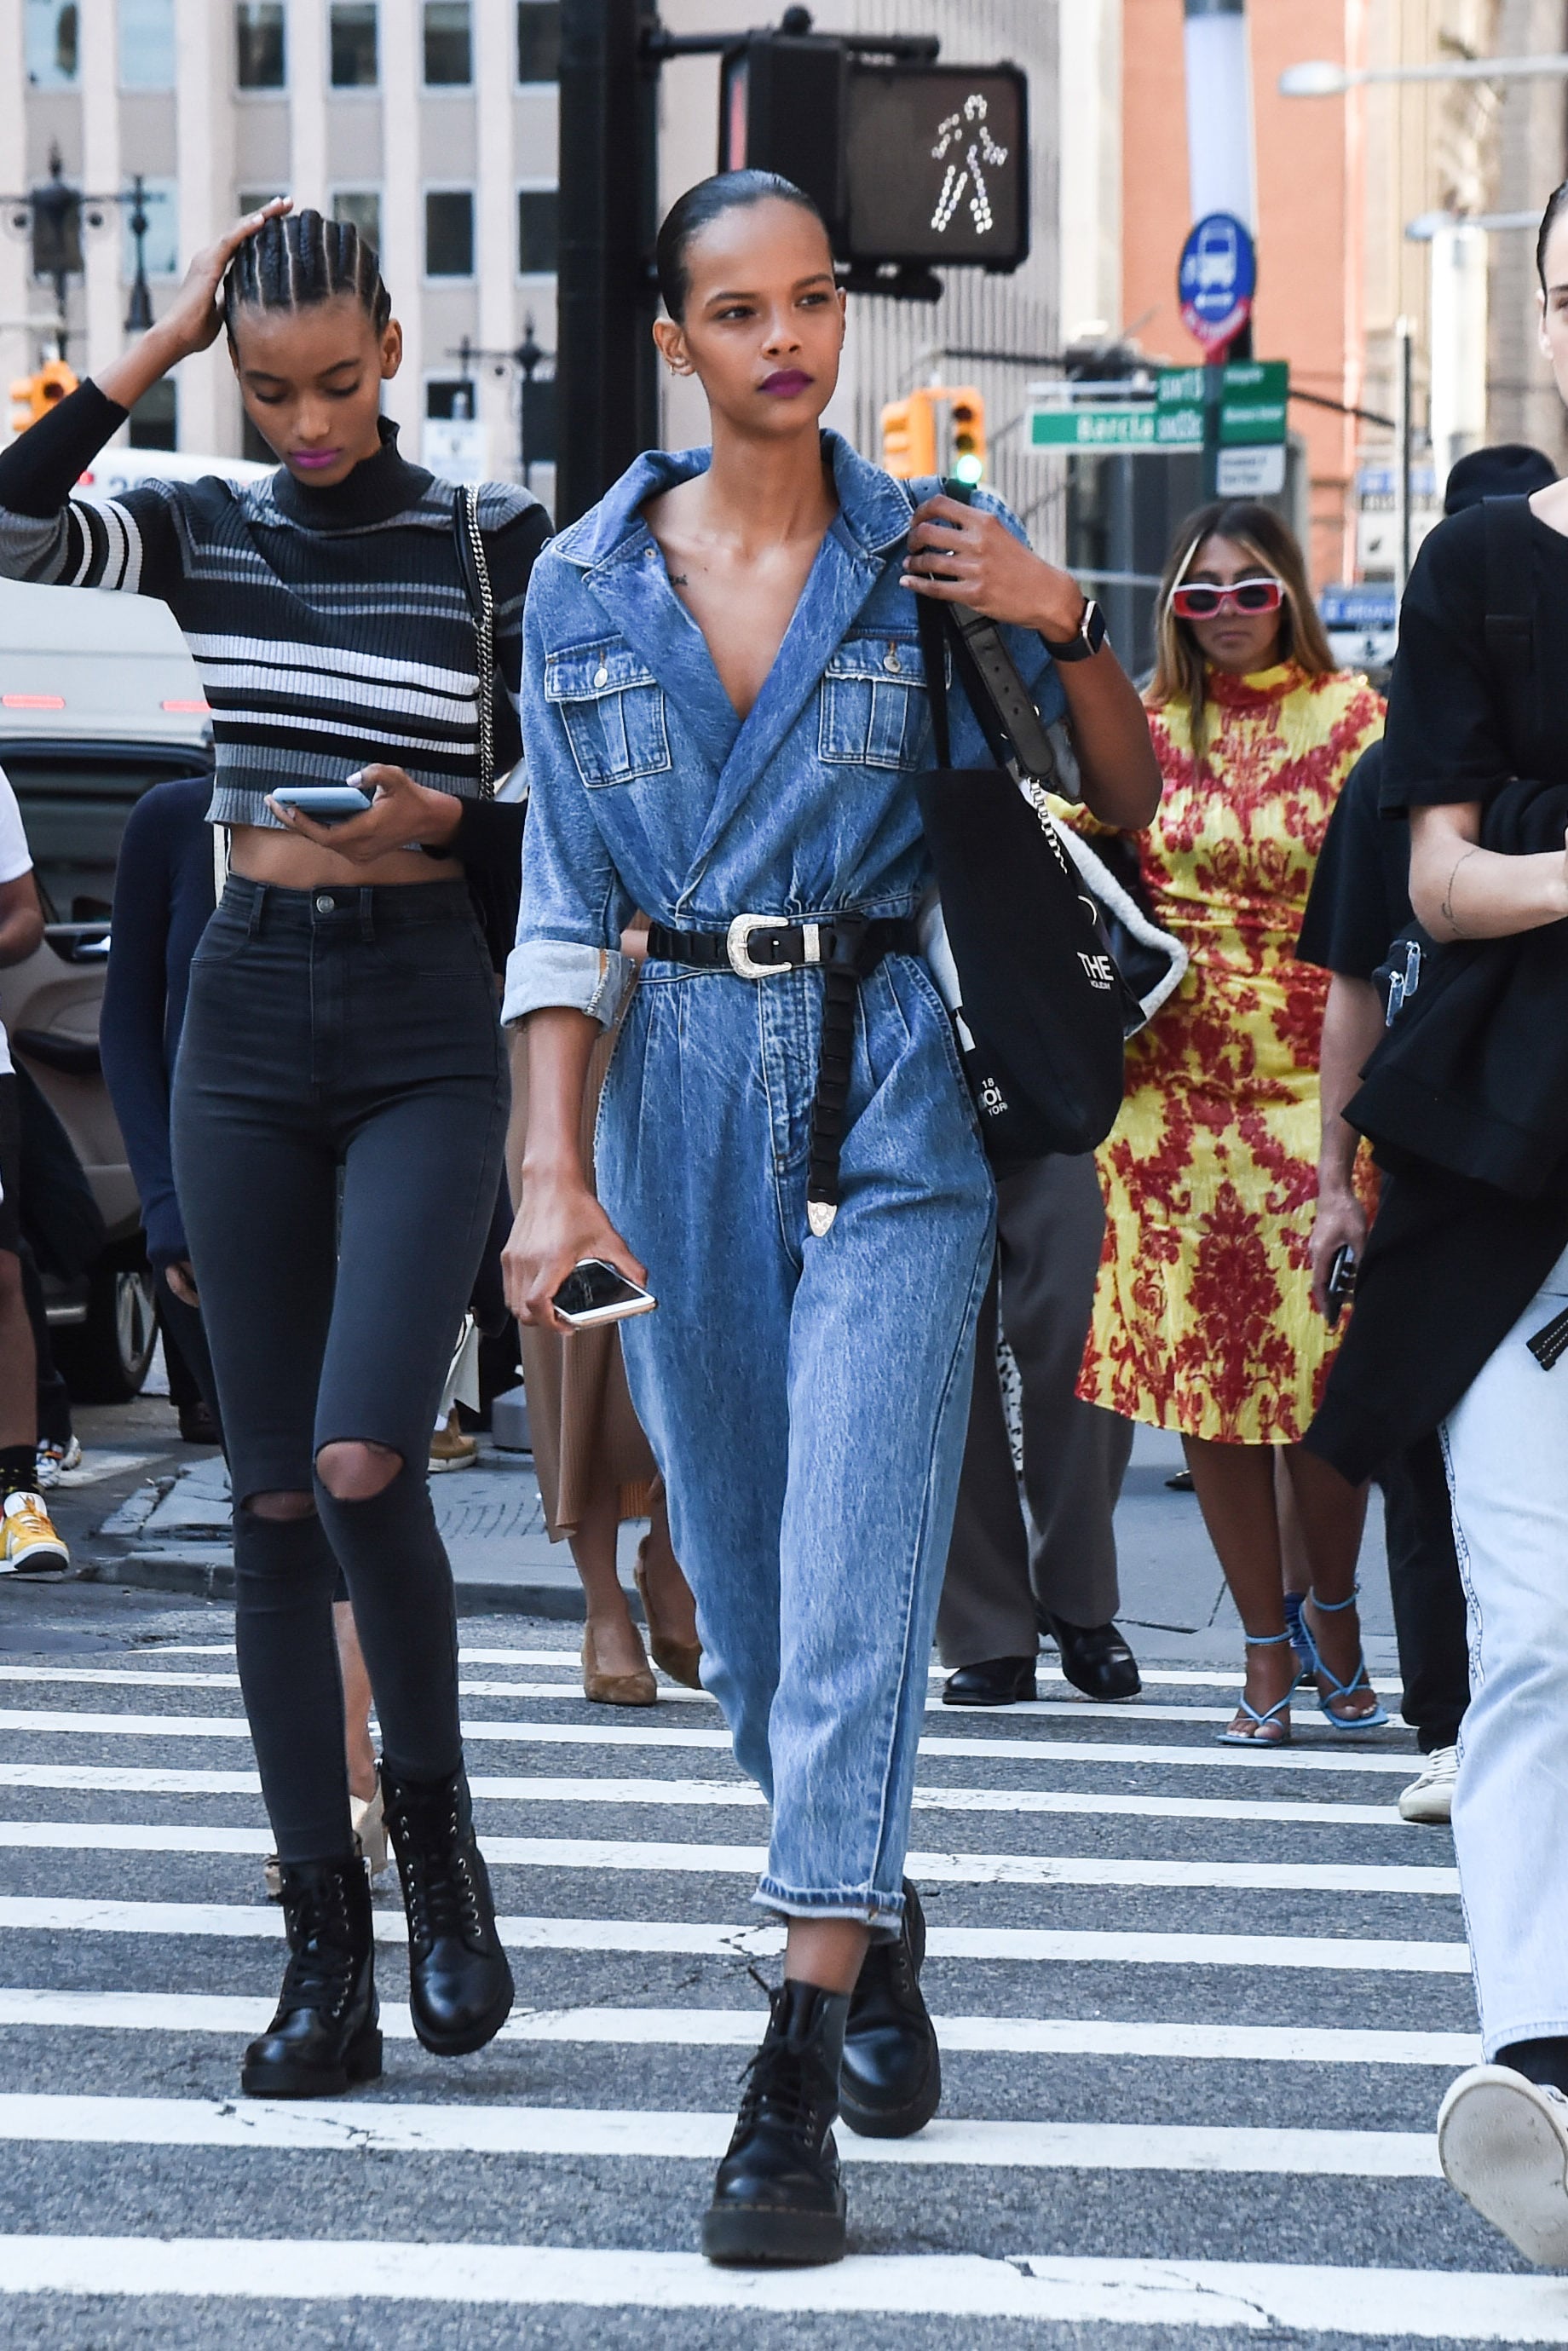 Jumpsuits and Overalls Were Popular Among Showgoers At New York